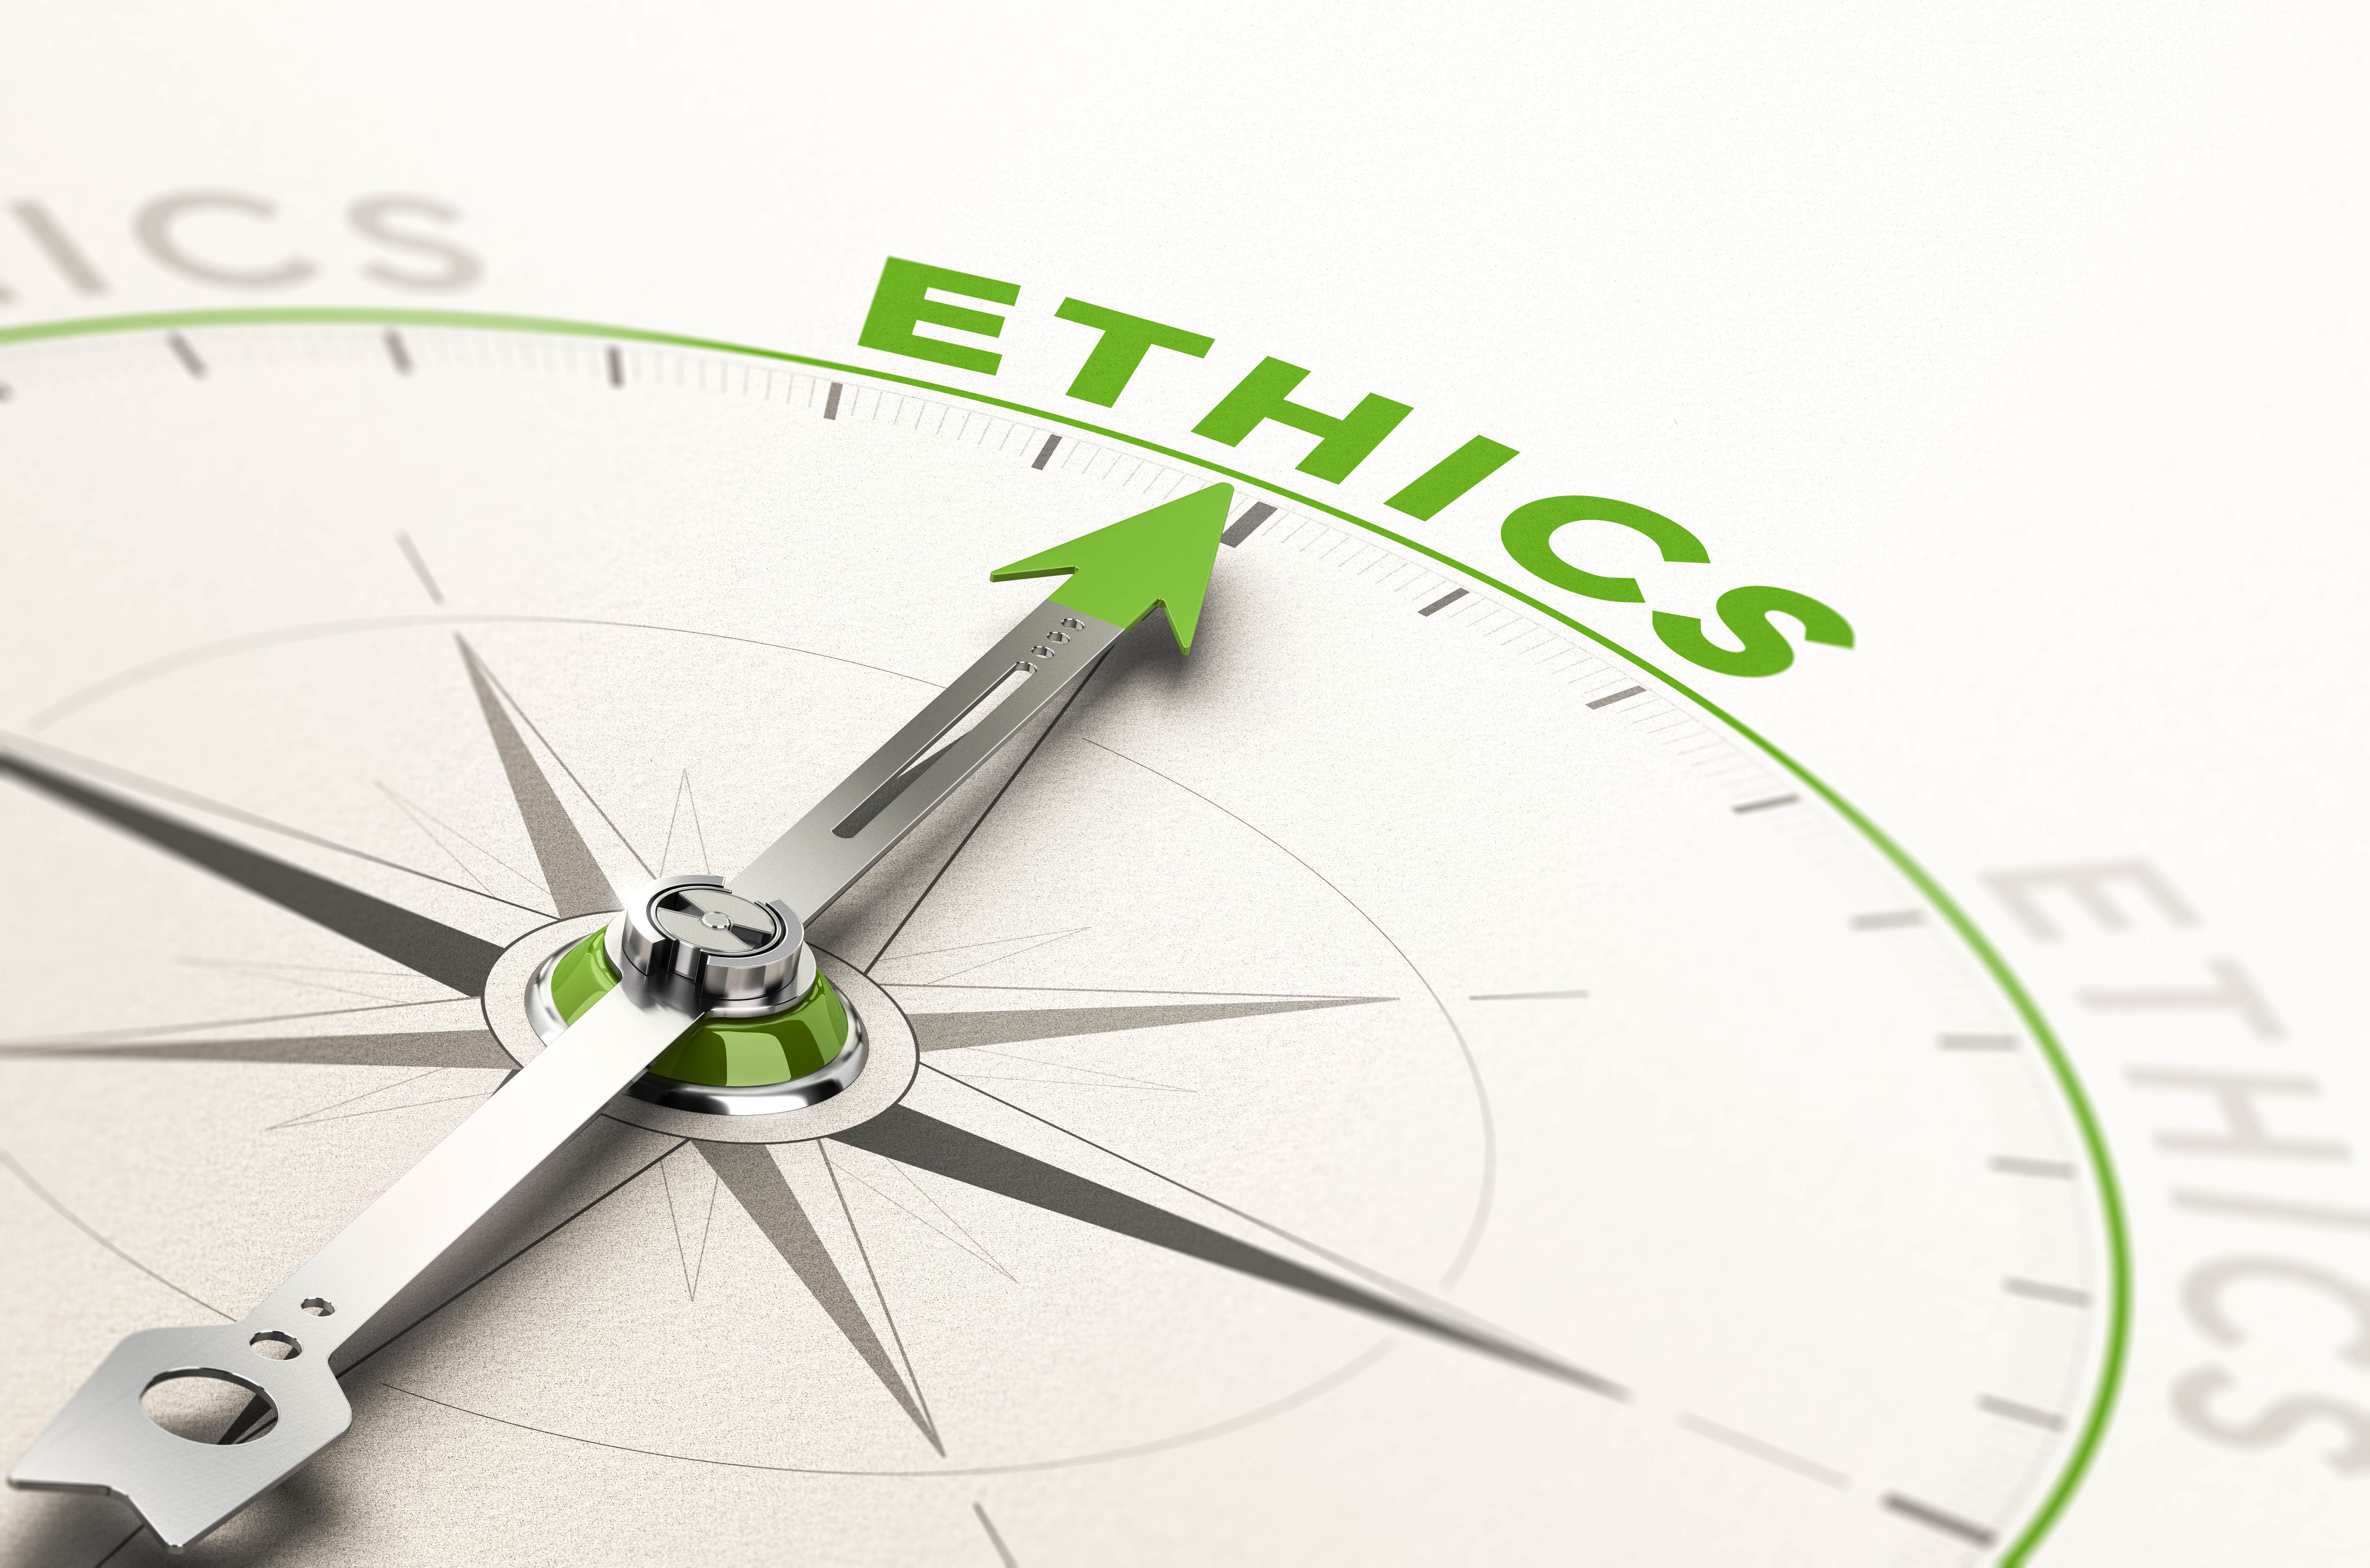 The graphic shows a compass with the needle pointing toward ethics.